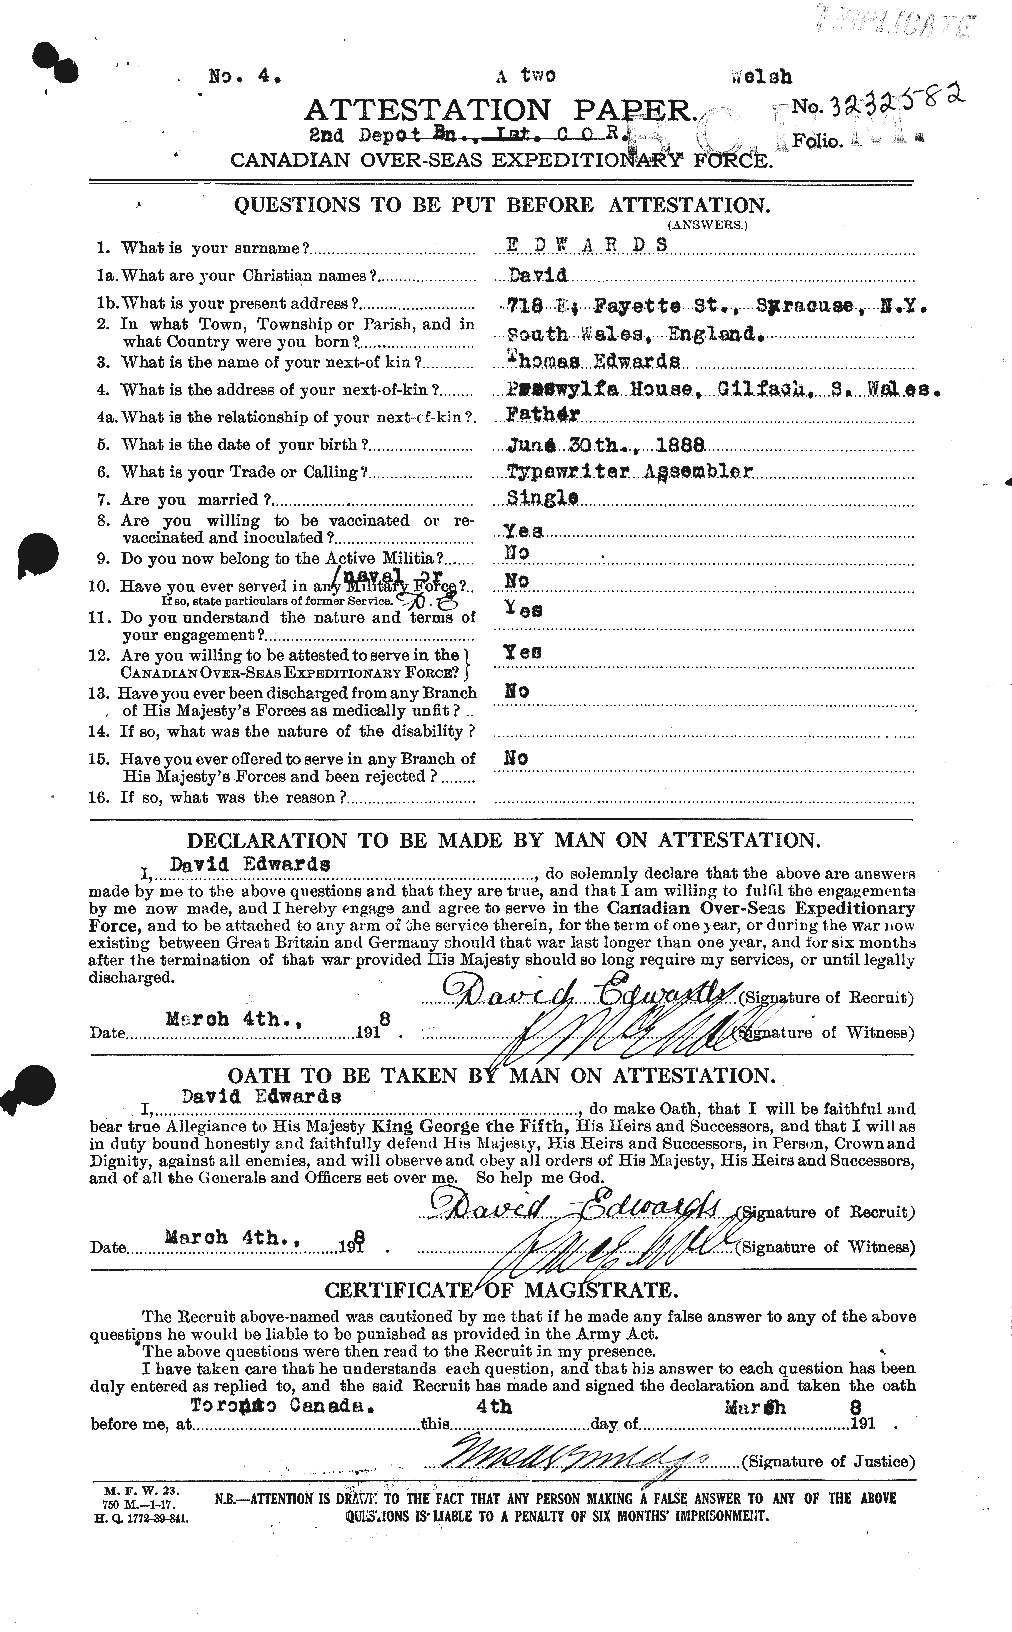 Personnel Records of the First World War - CEF 307869a